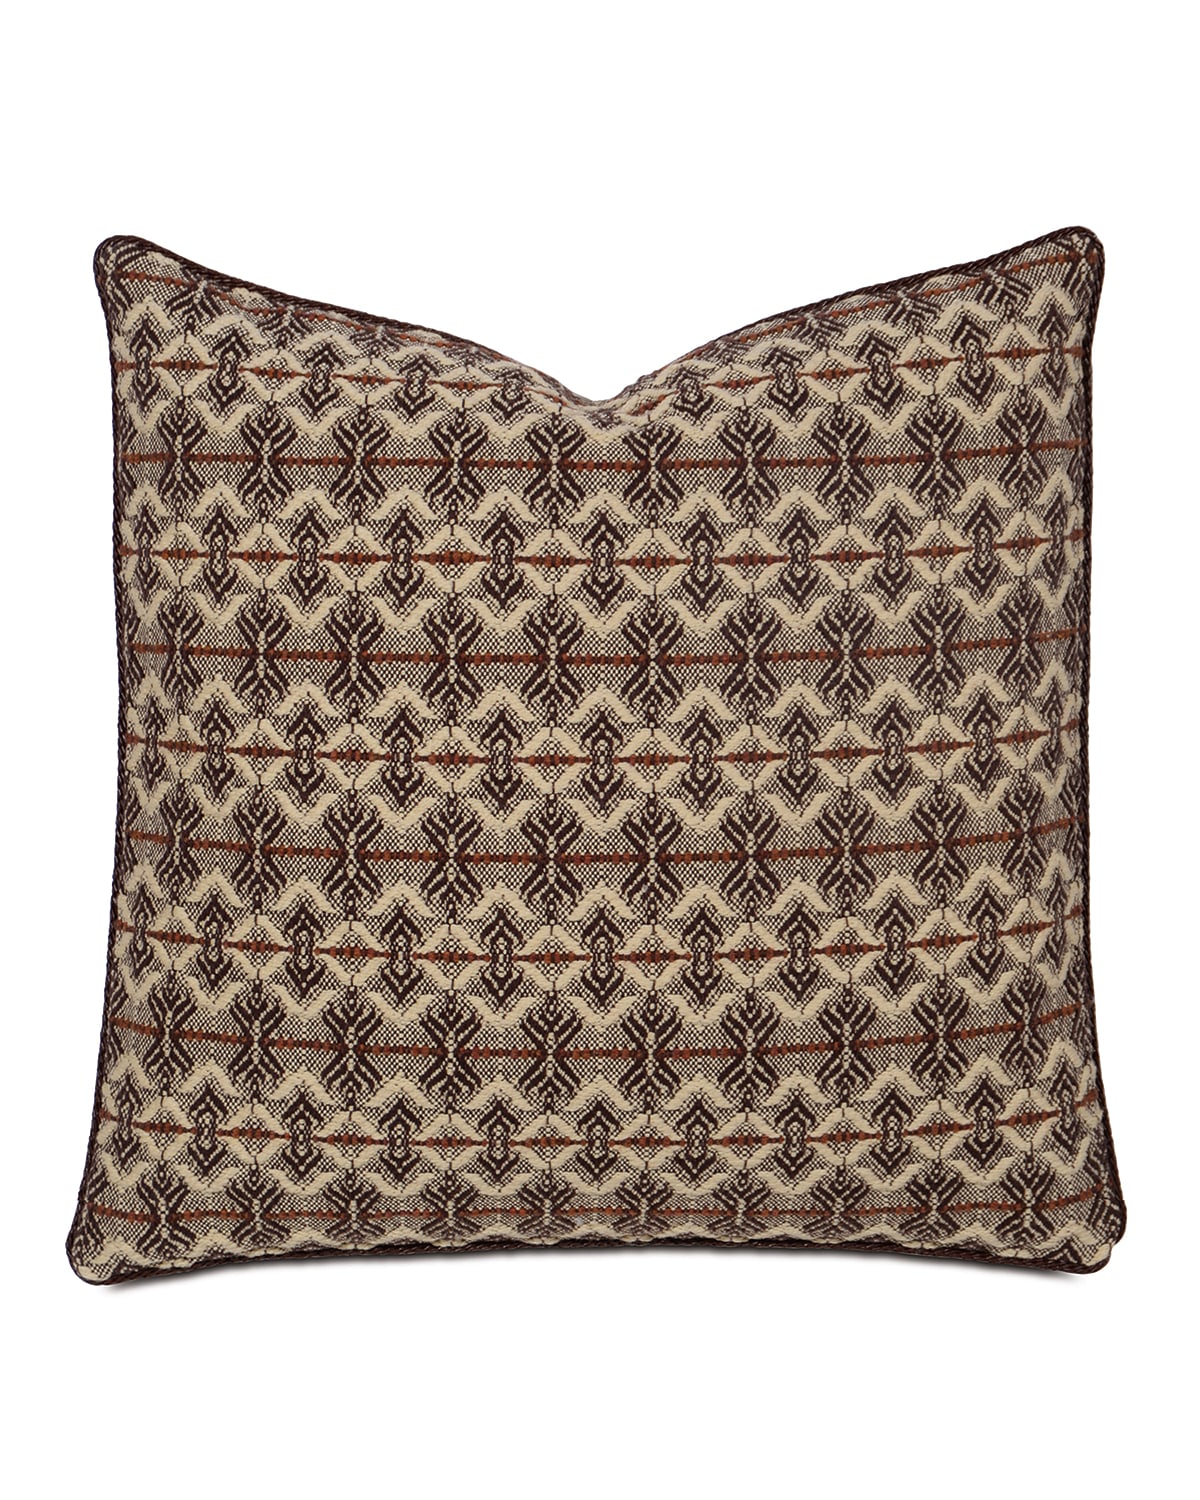 Image Eastern Accents Canyon Clay European Sham